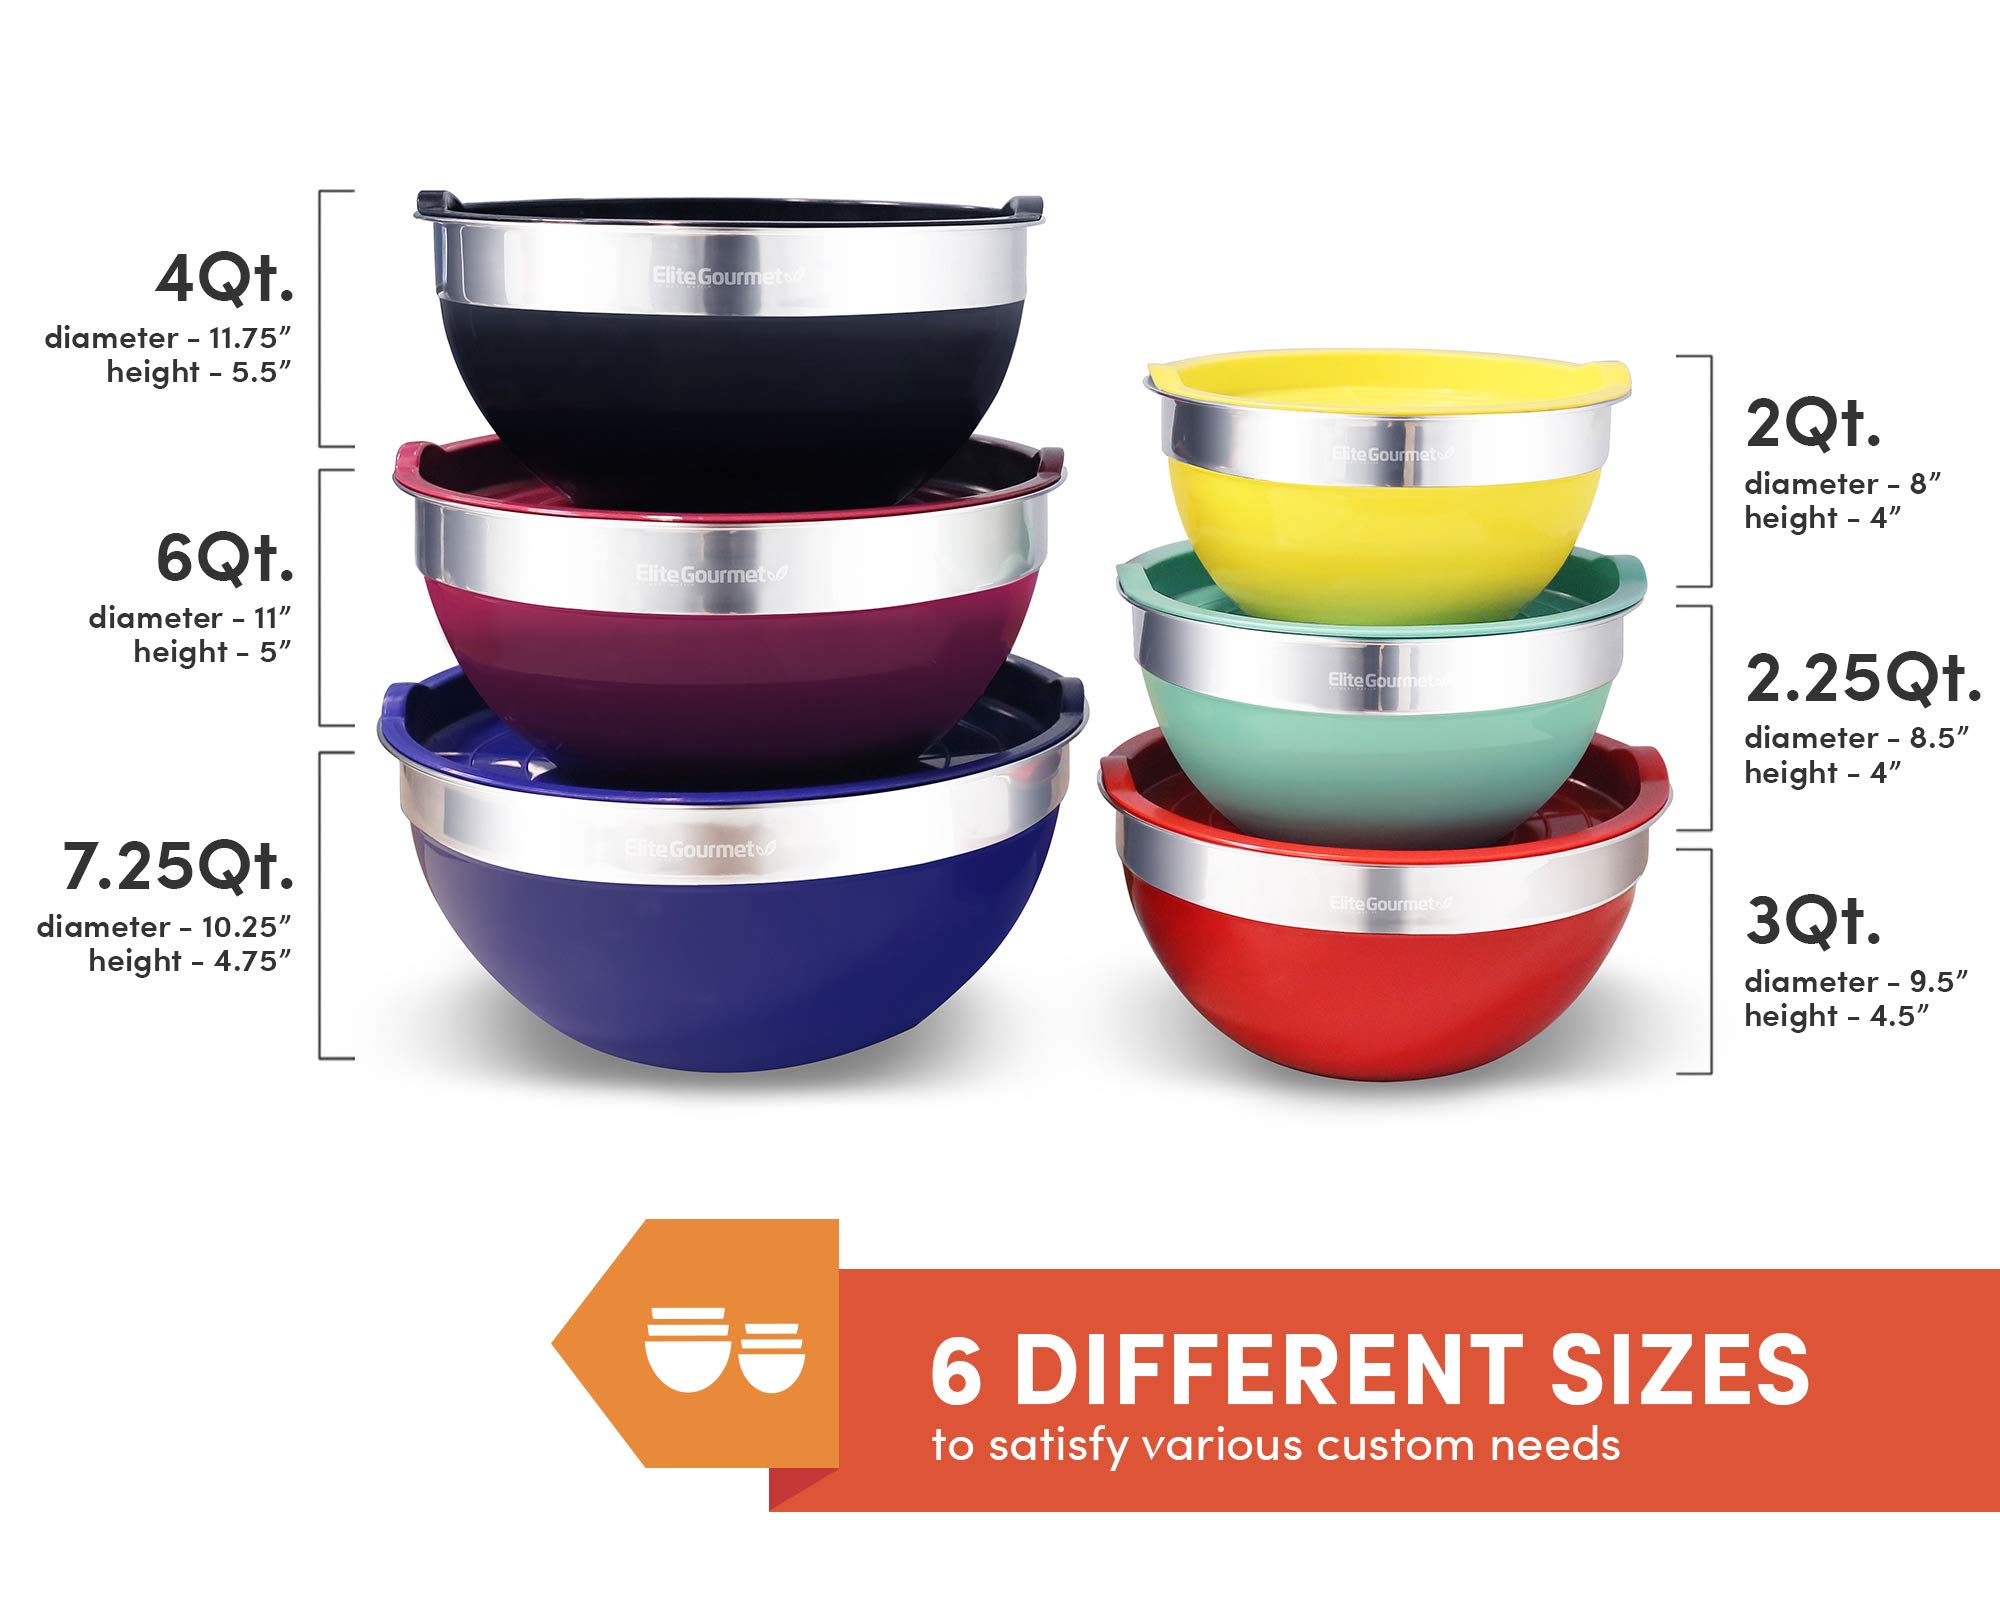 Elite Gourmet by EBS-0012 12-Piece Stainless Steel Interior Colored Stackable Nesting Mixing Bowls with Airtight Lids (Set of 6) Space Saving Food Storage, Baking, Melting Chocolate, Multi-Colors